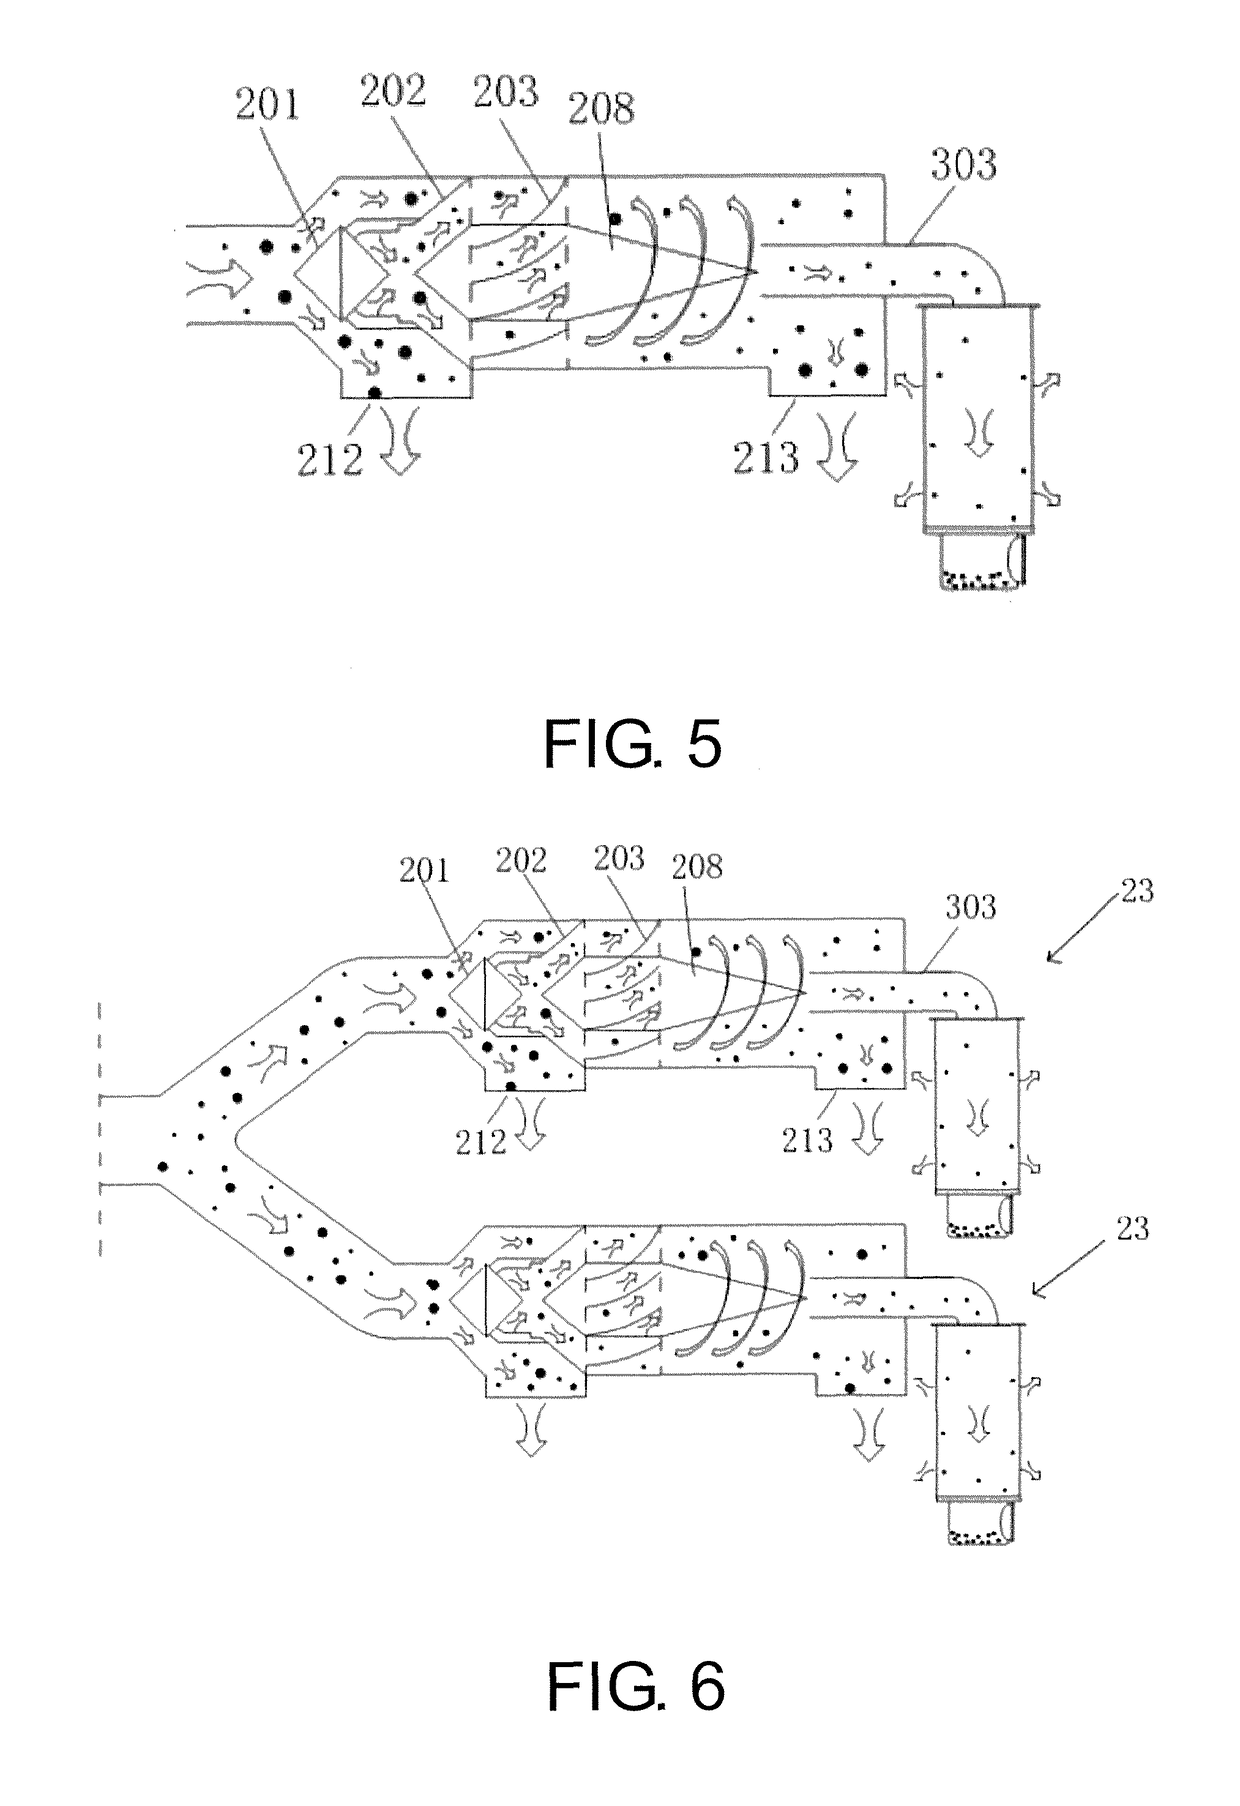 Dust separation apparatus and intelligent control system including the apparatus